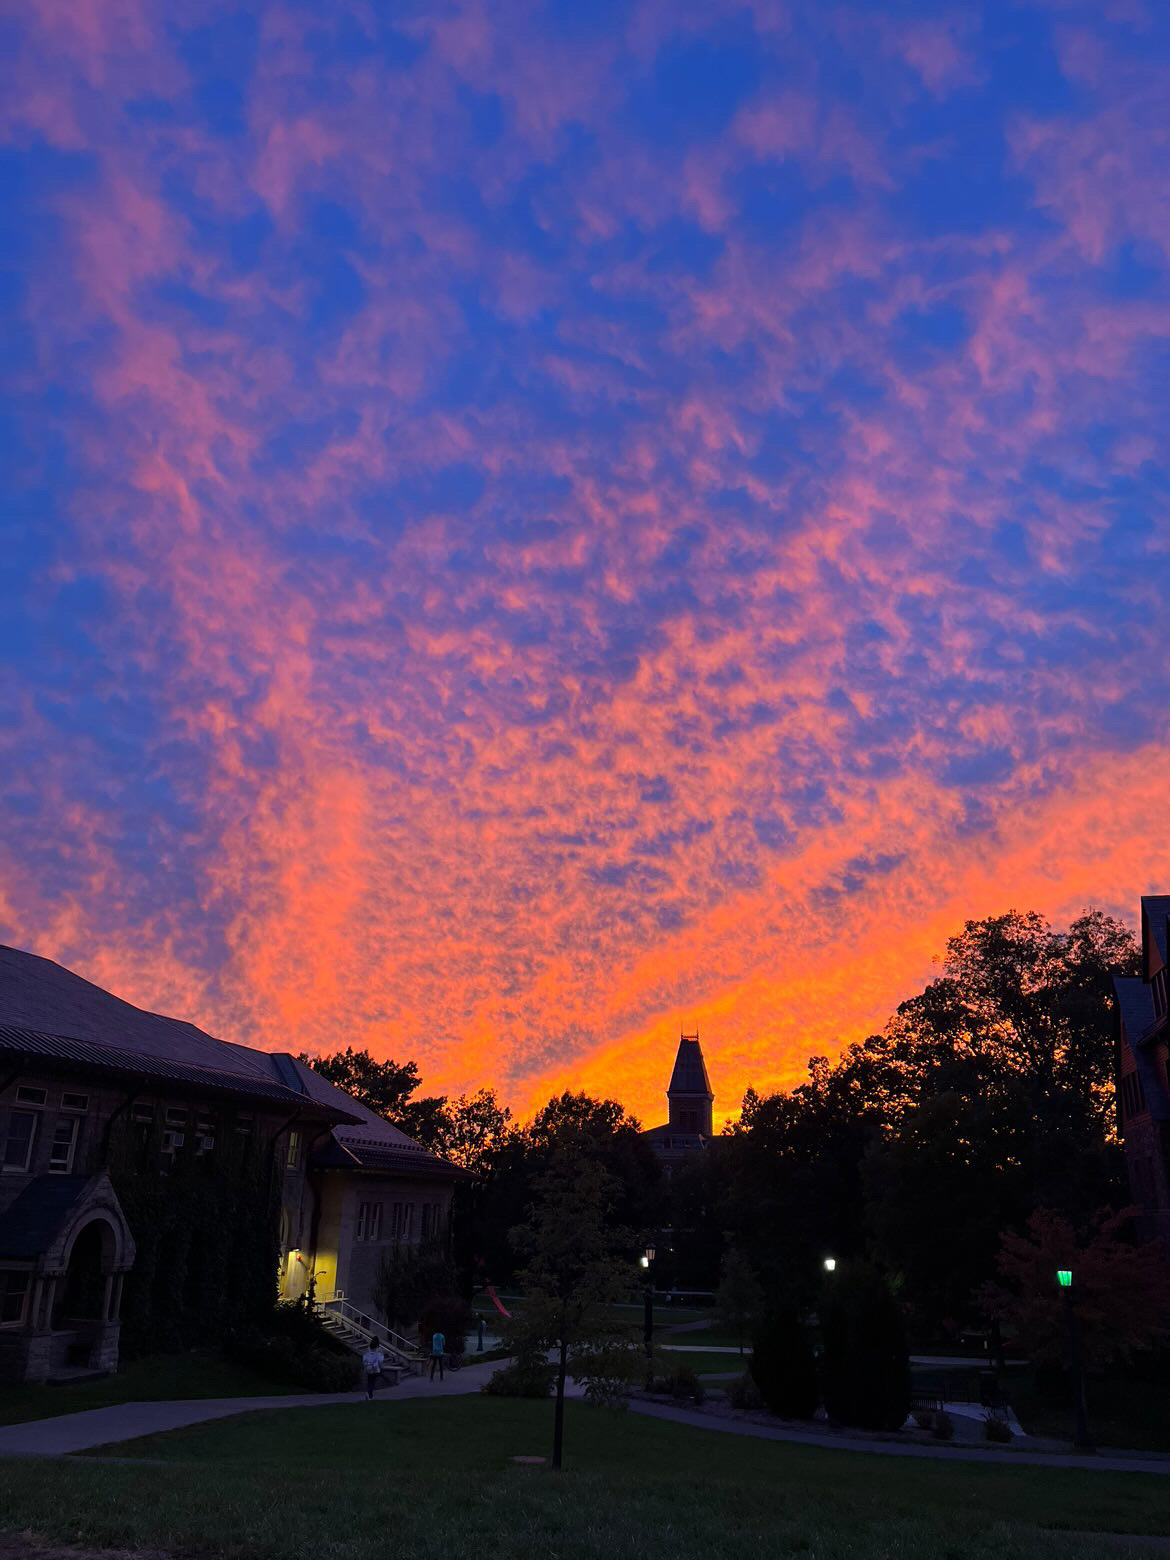 An orange sunset against a dark blue sky over the Cornell University campus.